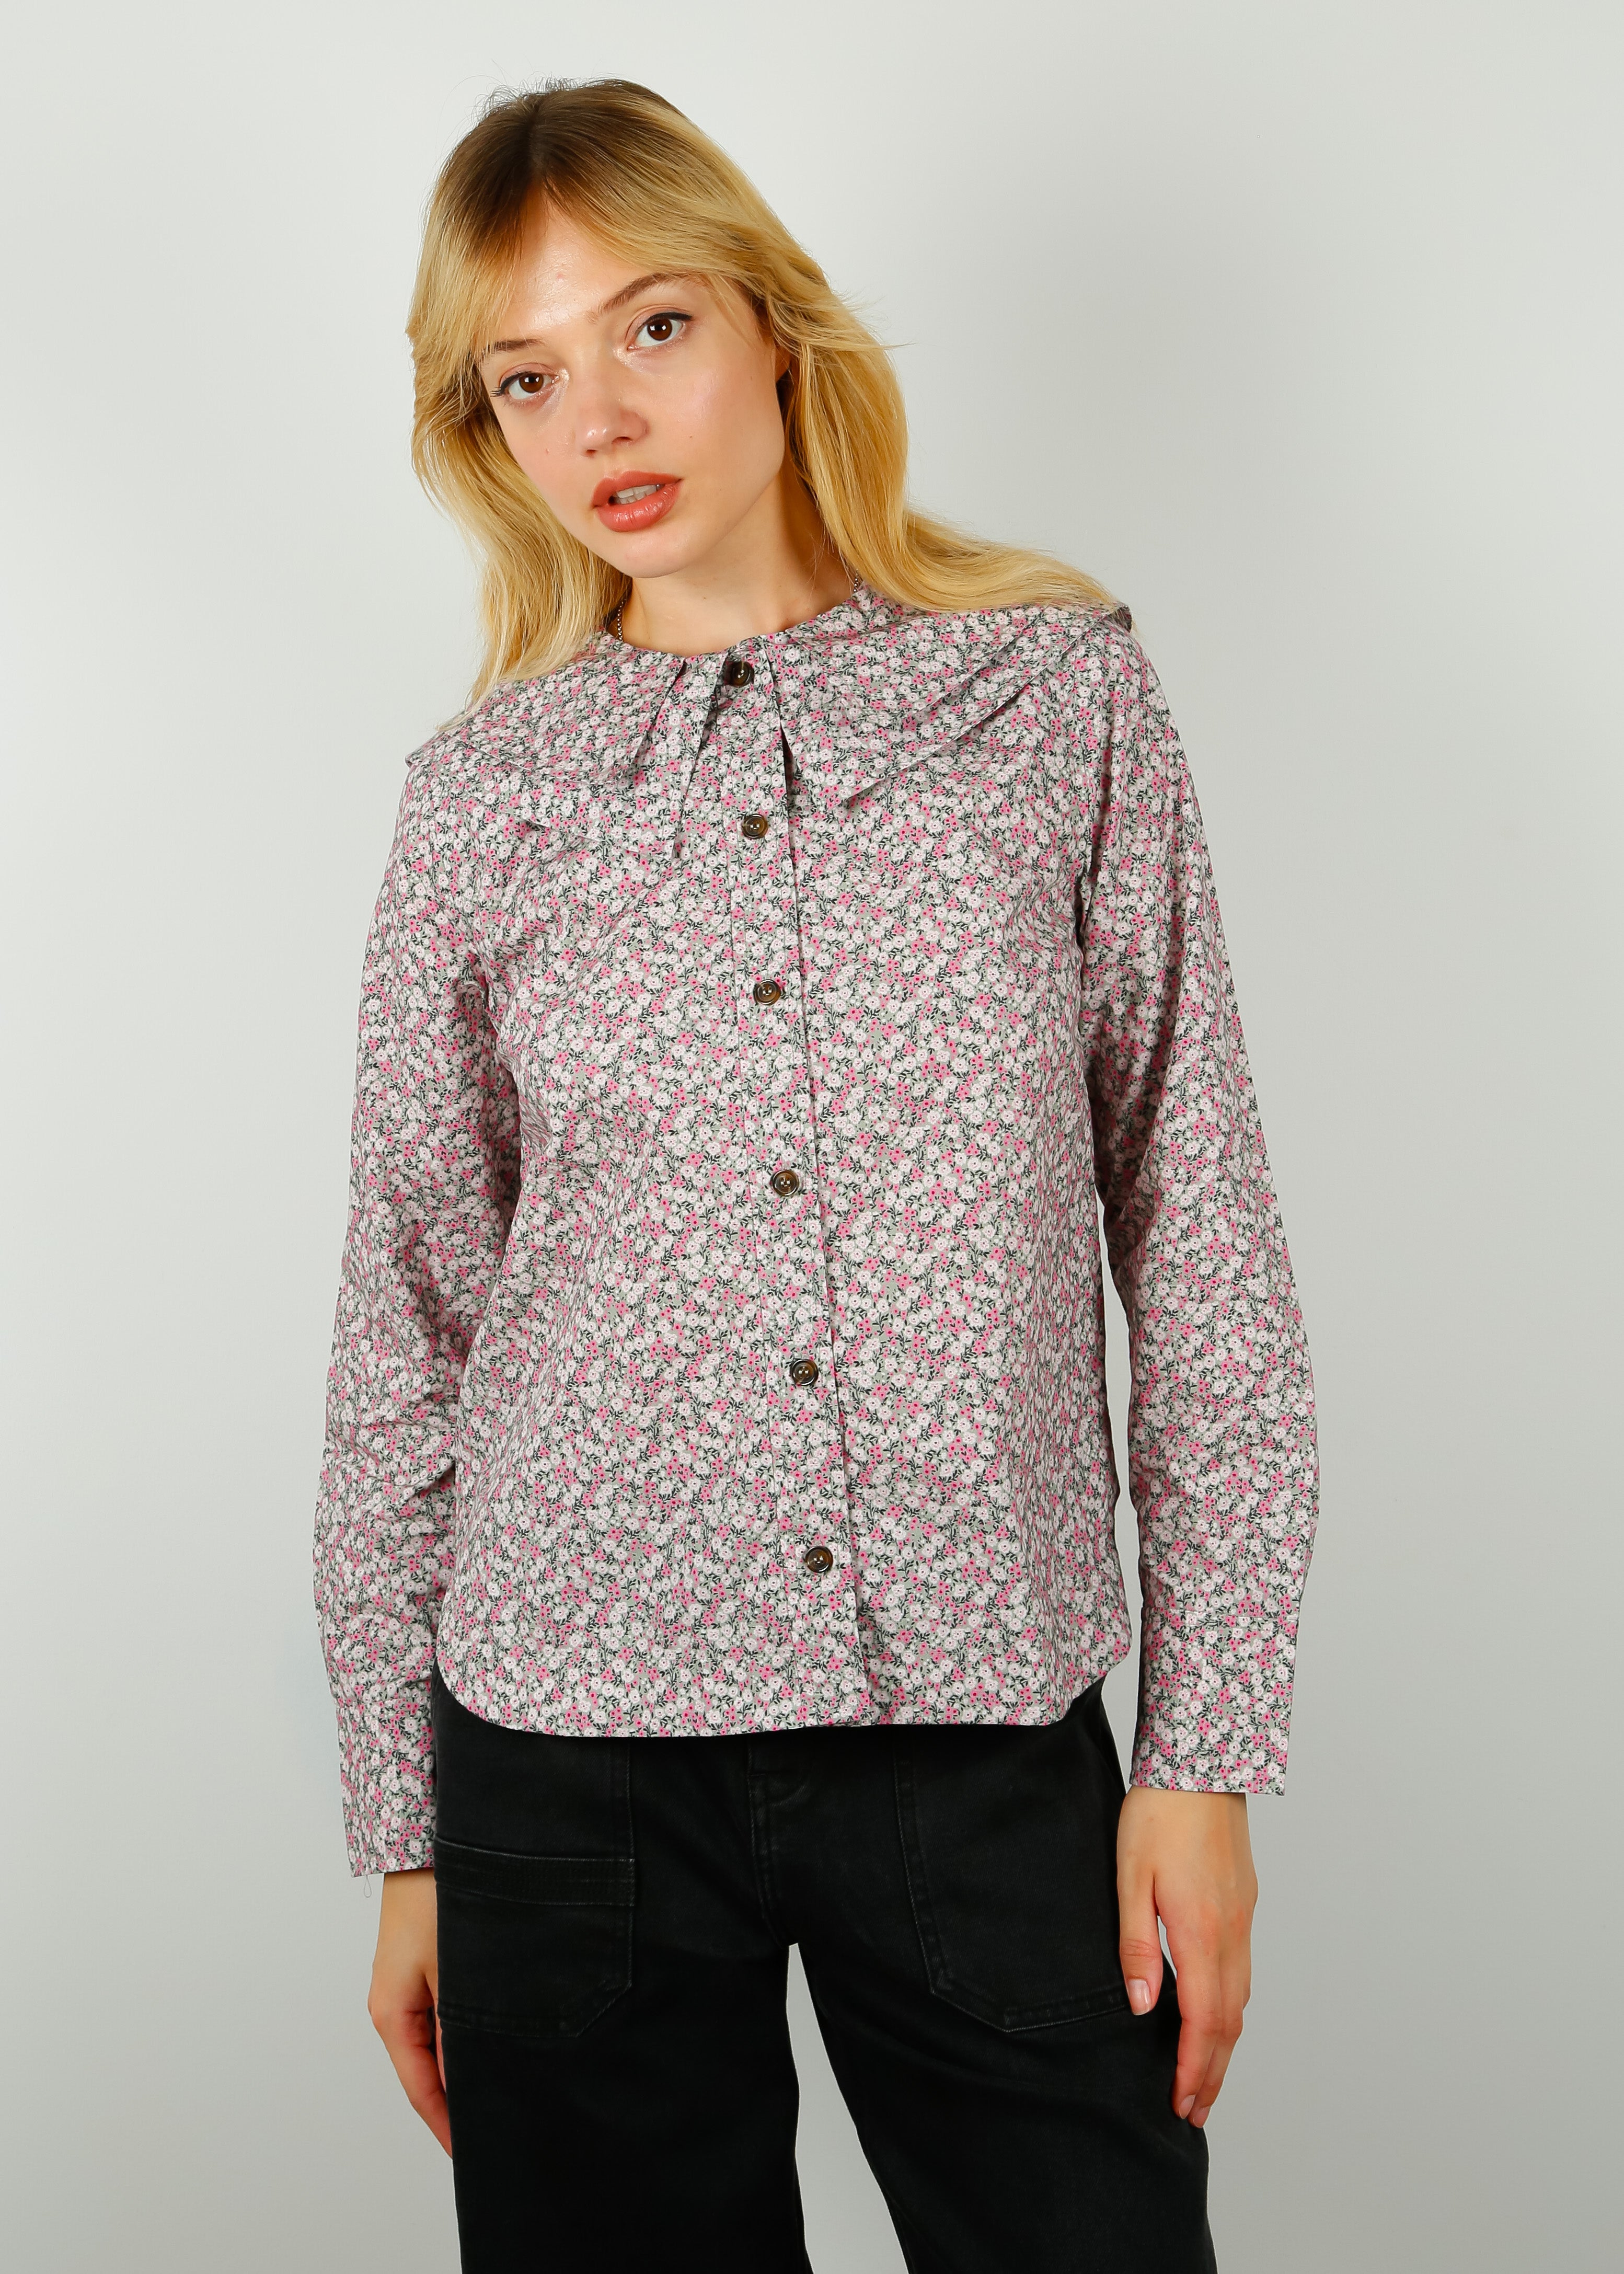 GANNI F8218 Printed Double Collar Shirt in Frost Grey